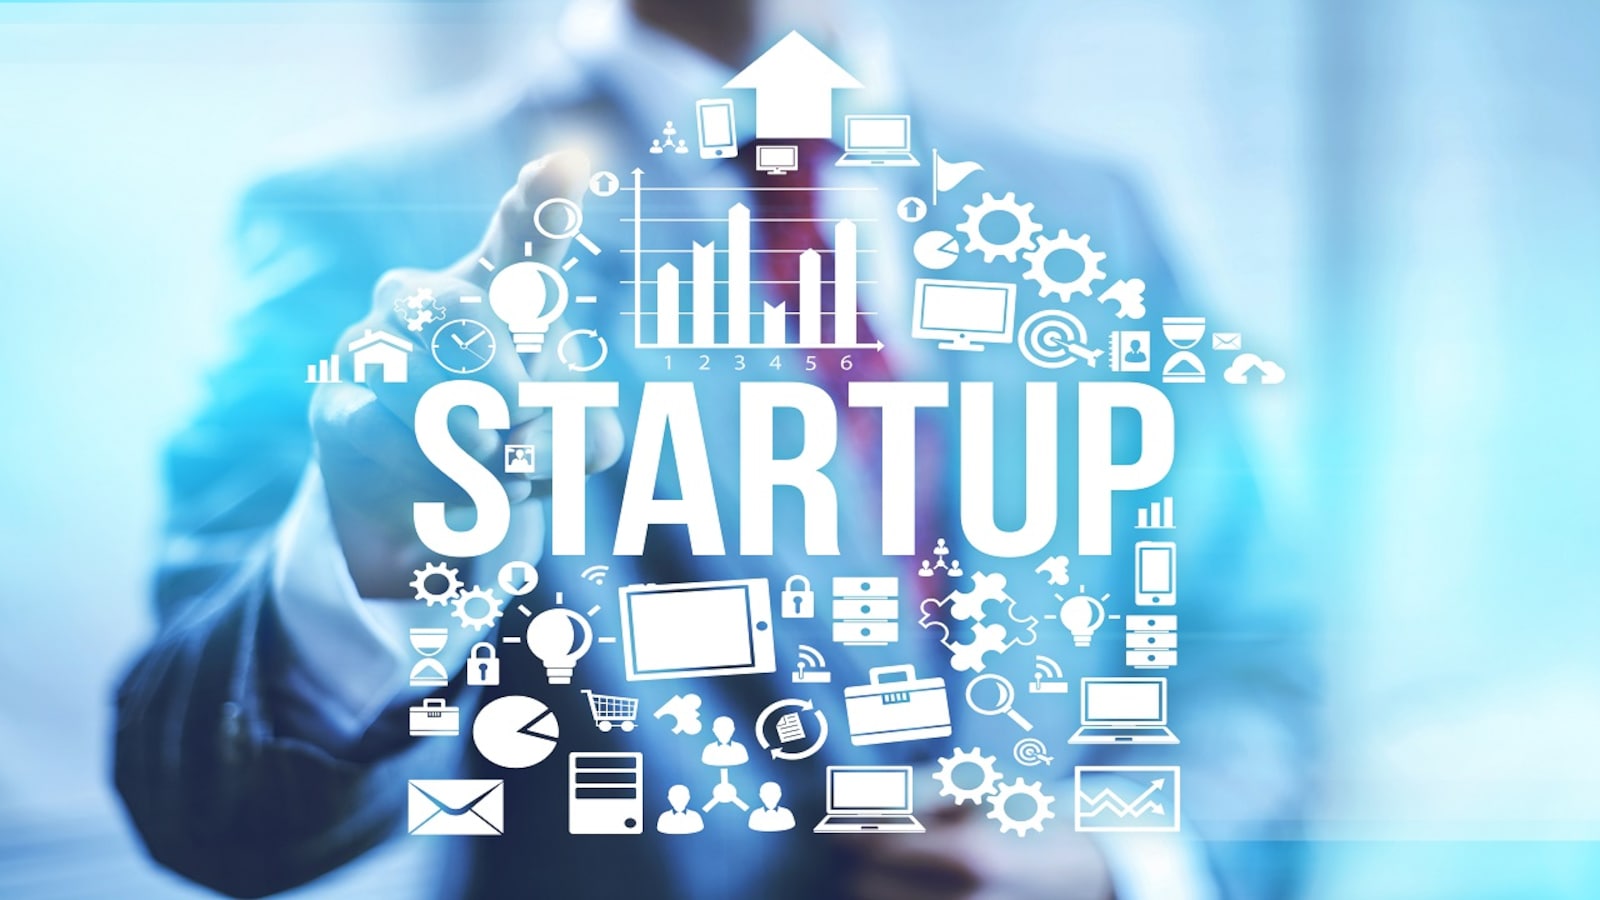 startups created 7.68 lakh jobs in india in last 6 years, with maharashtra taking the lead